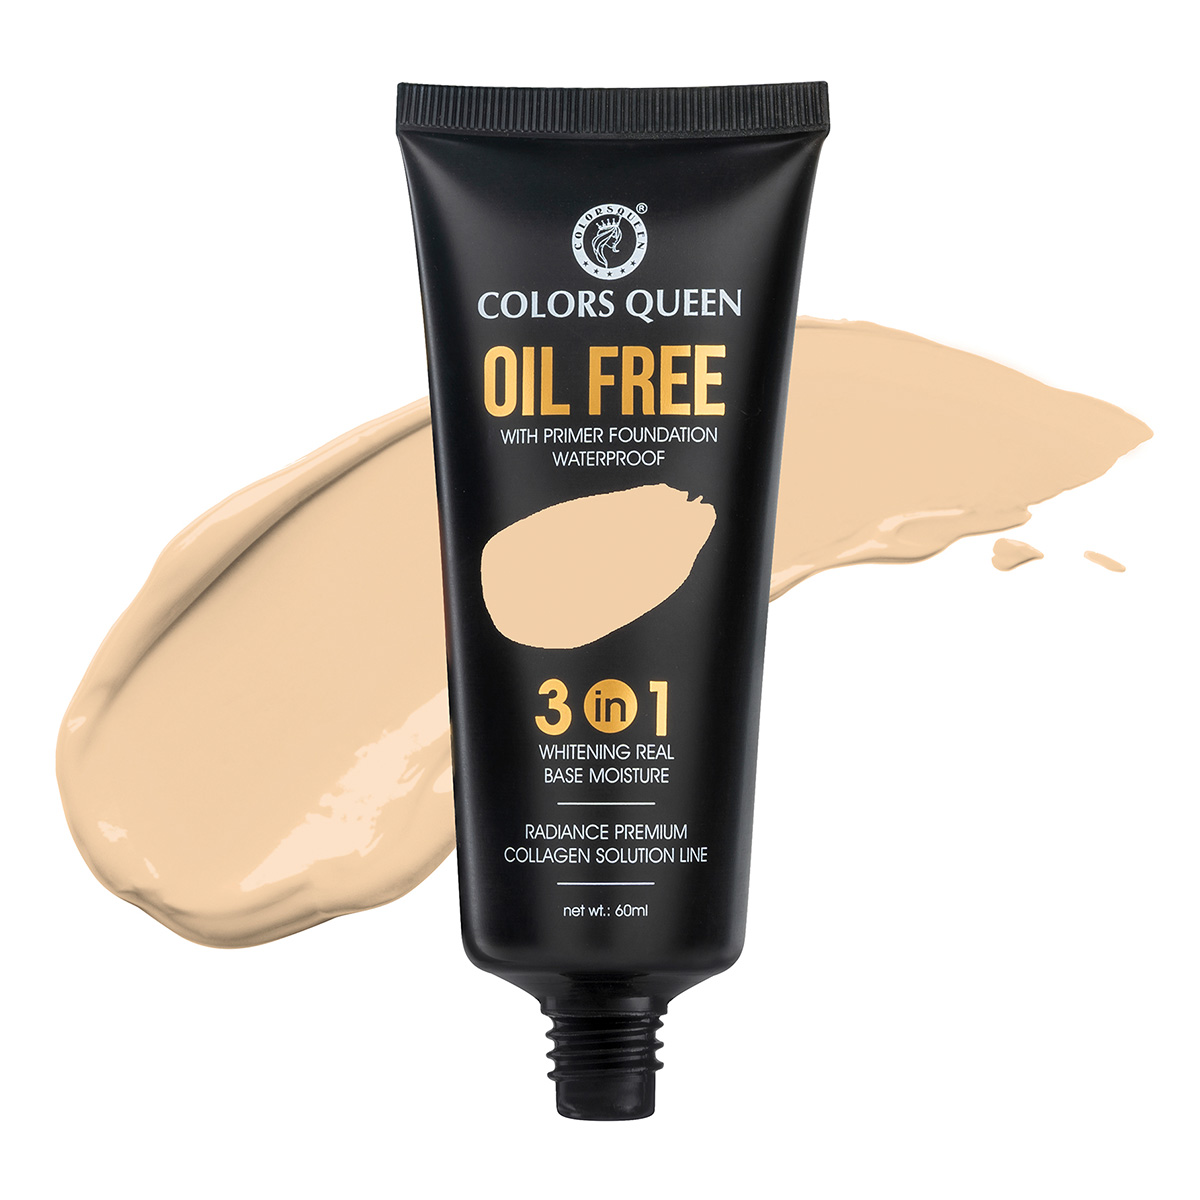 Colors Queen 3 In 1 Oil Free Foundation Full Coverage Foundation With Prime - Shade 02 Natural, 60ml